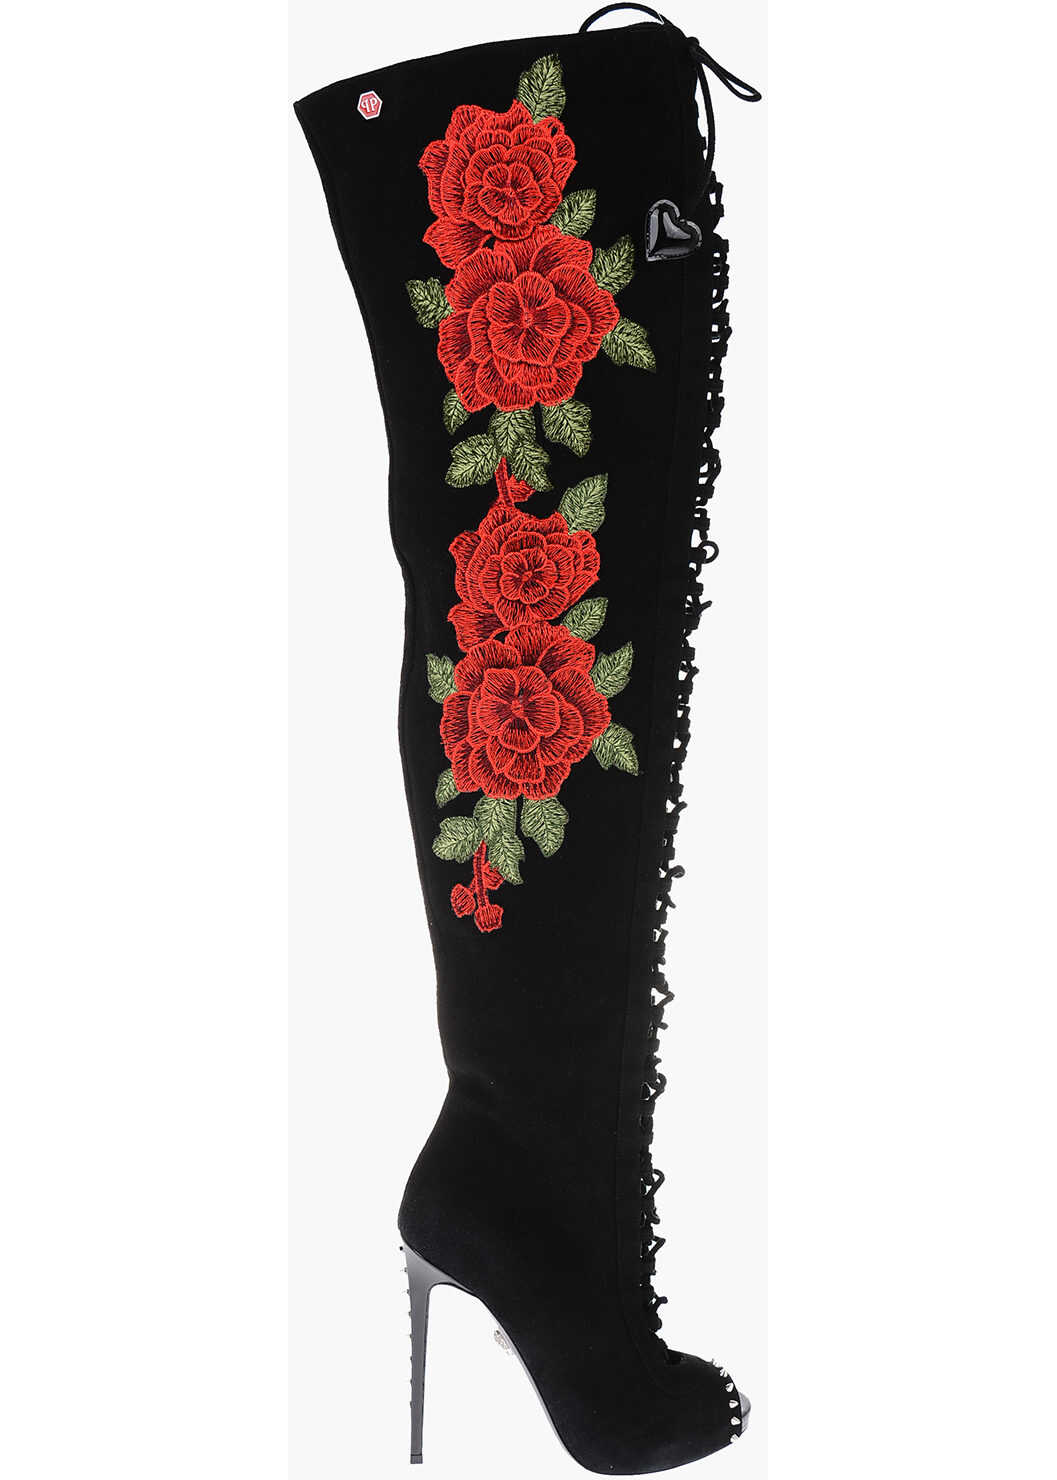 Philipp Plein 12Cm Leather Roses Show Peep Toe Lace-Up Boots Black b-mall.ro